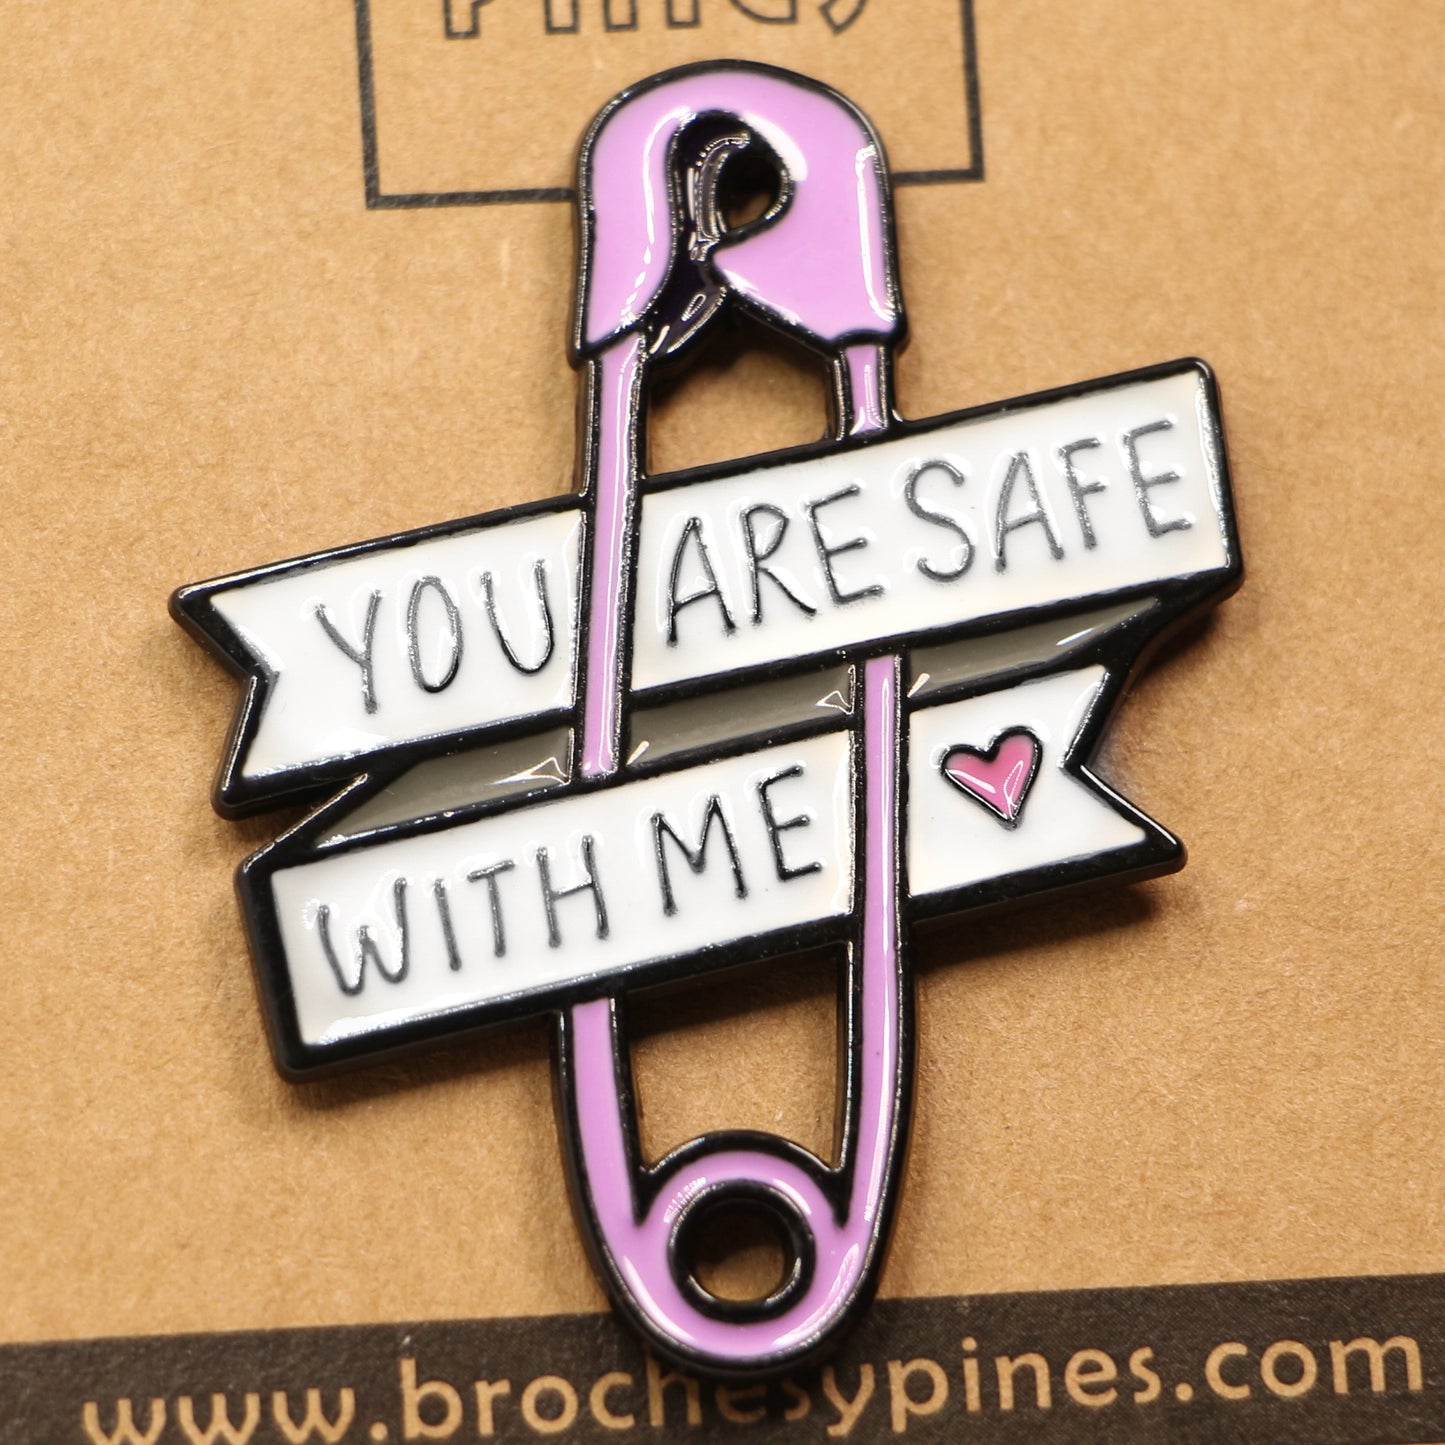 Pin "You Are Safe With Me" - Frases